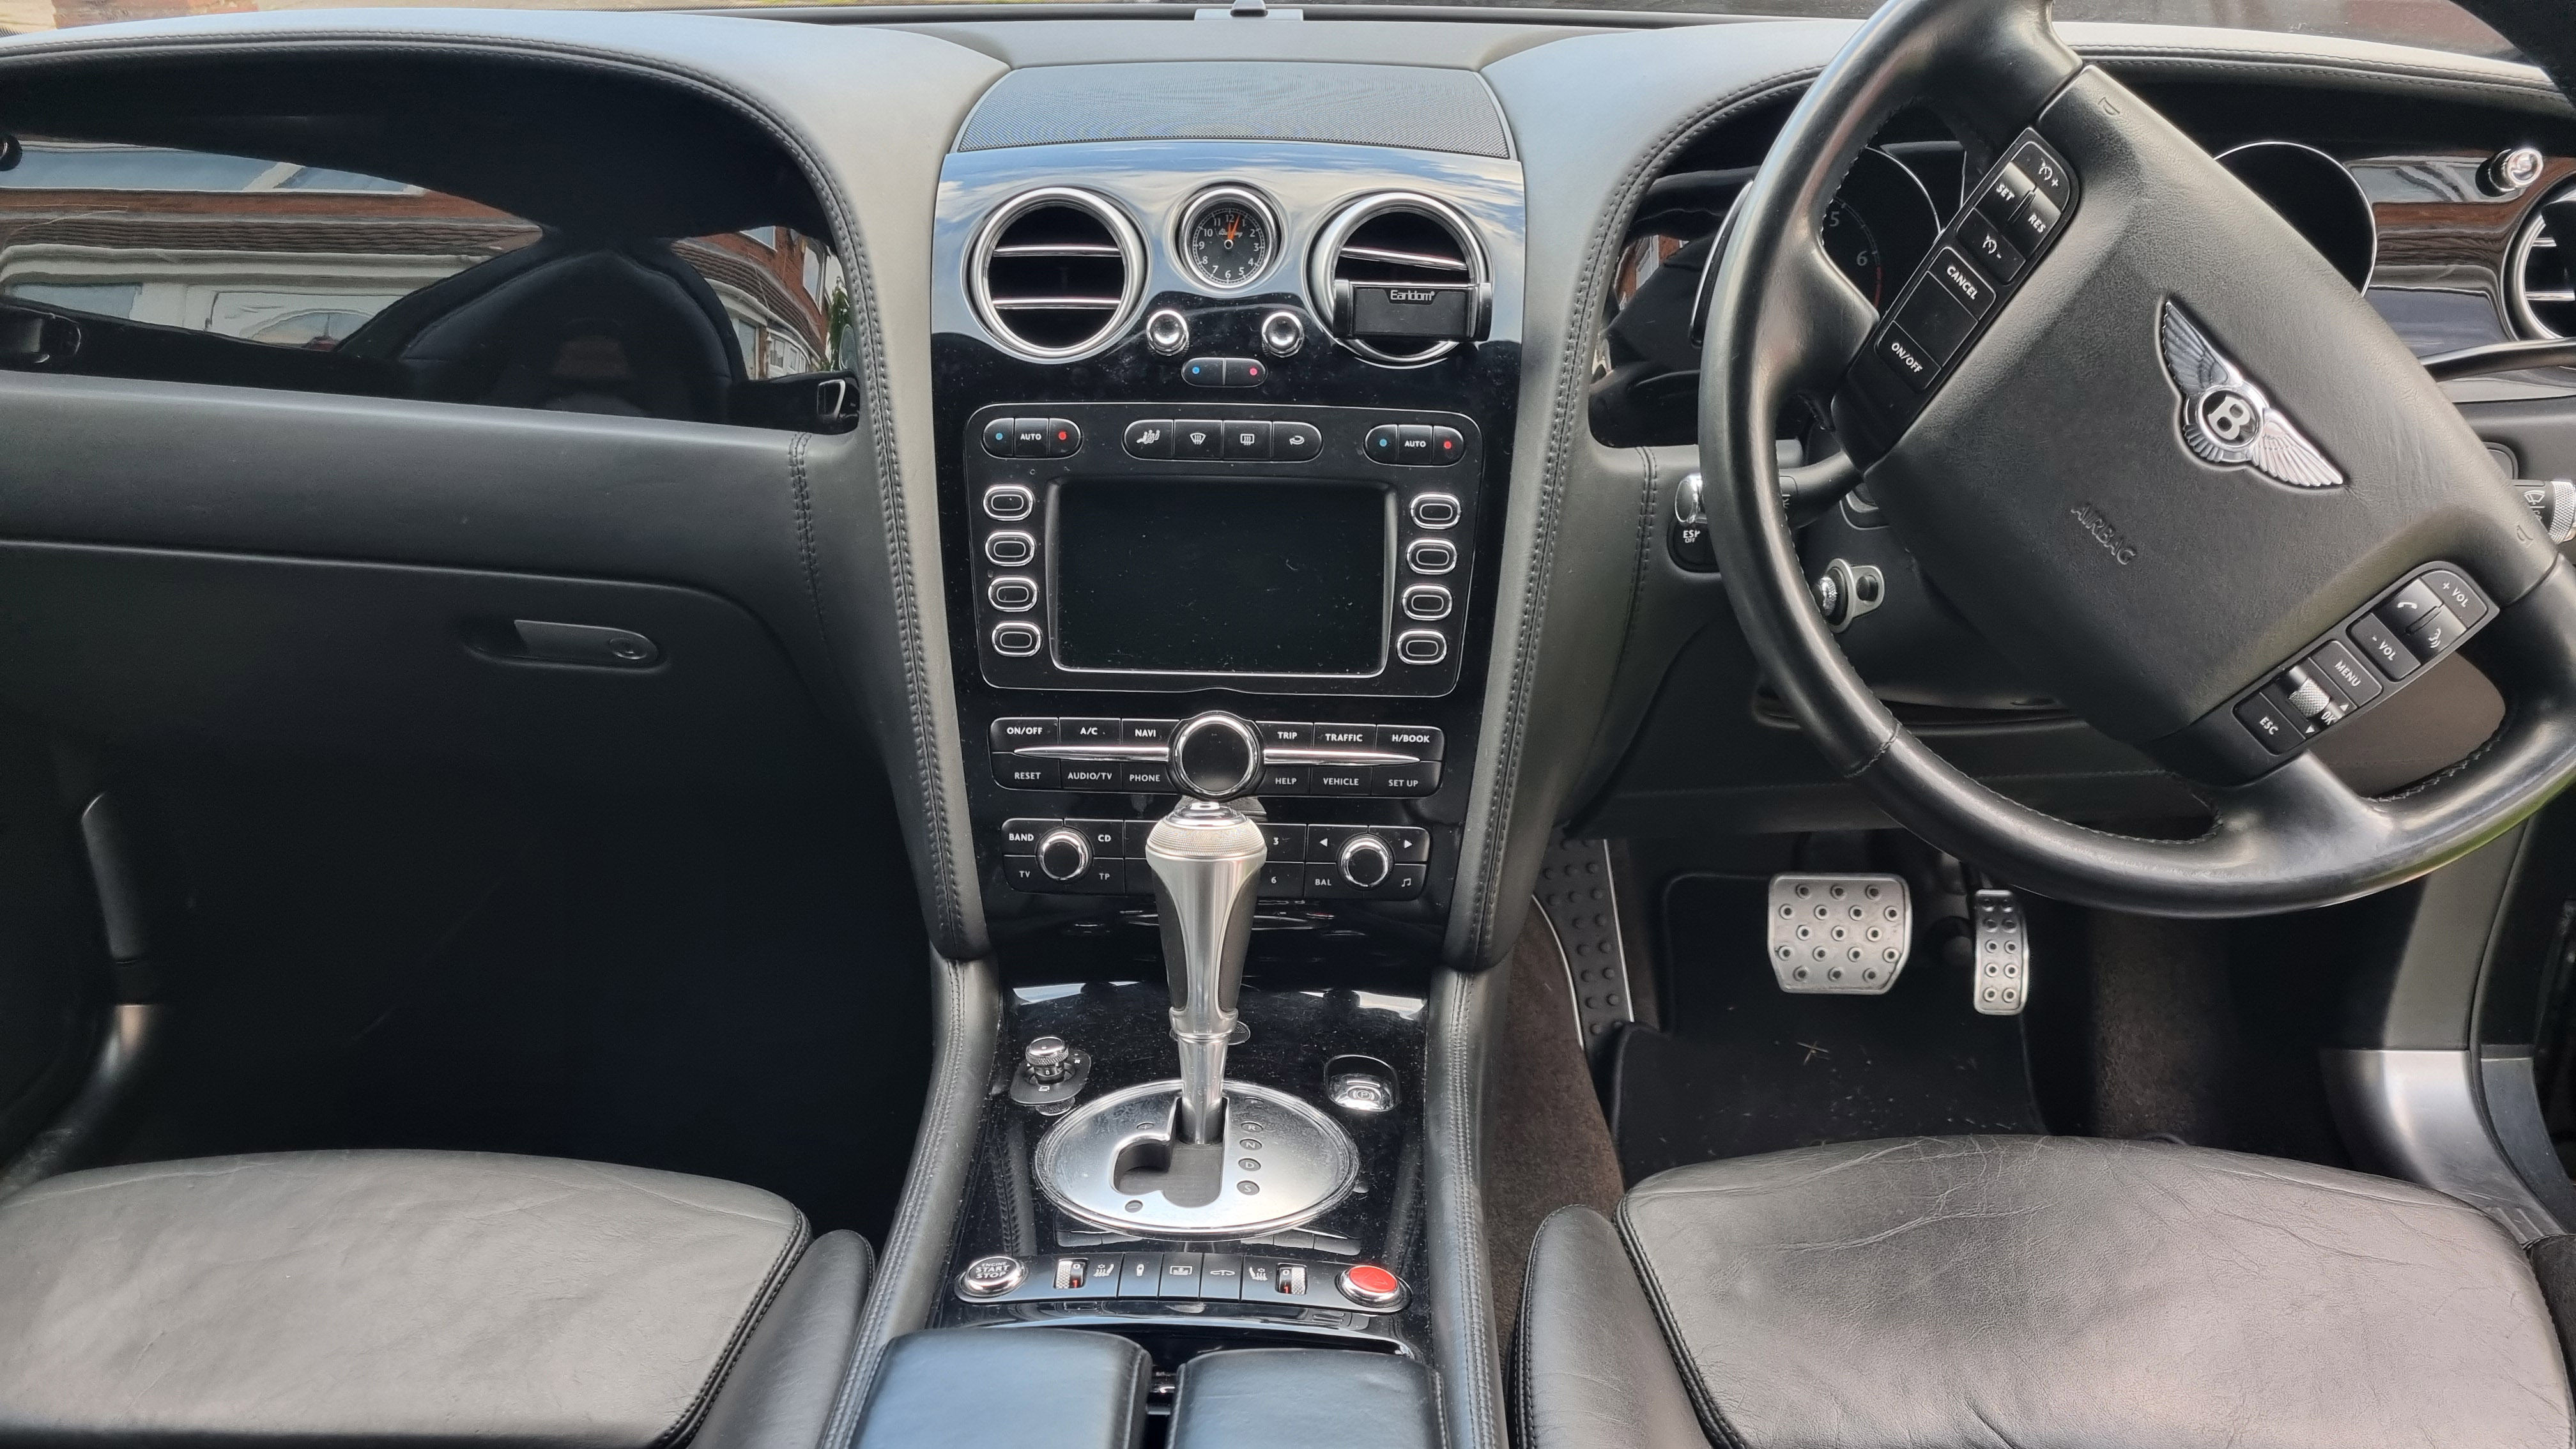 Front interior view of the Bentley's Dashboard and steering wheel from the rear passengers view